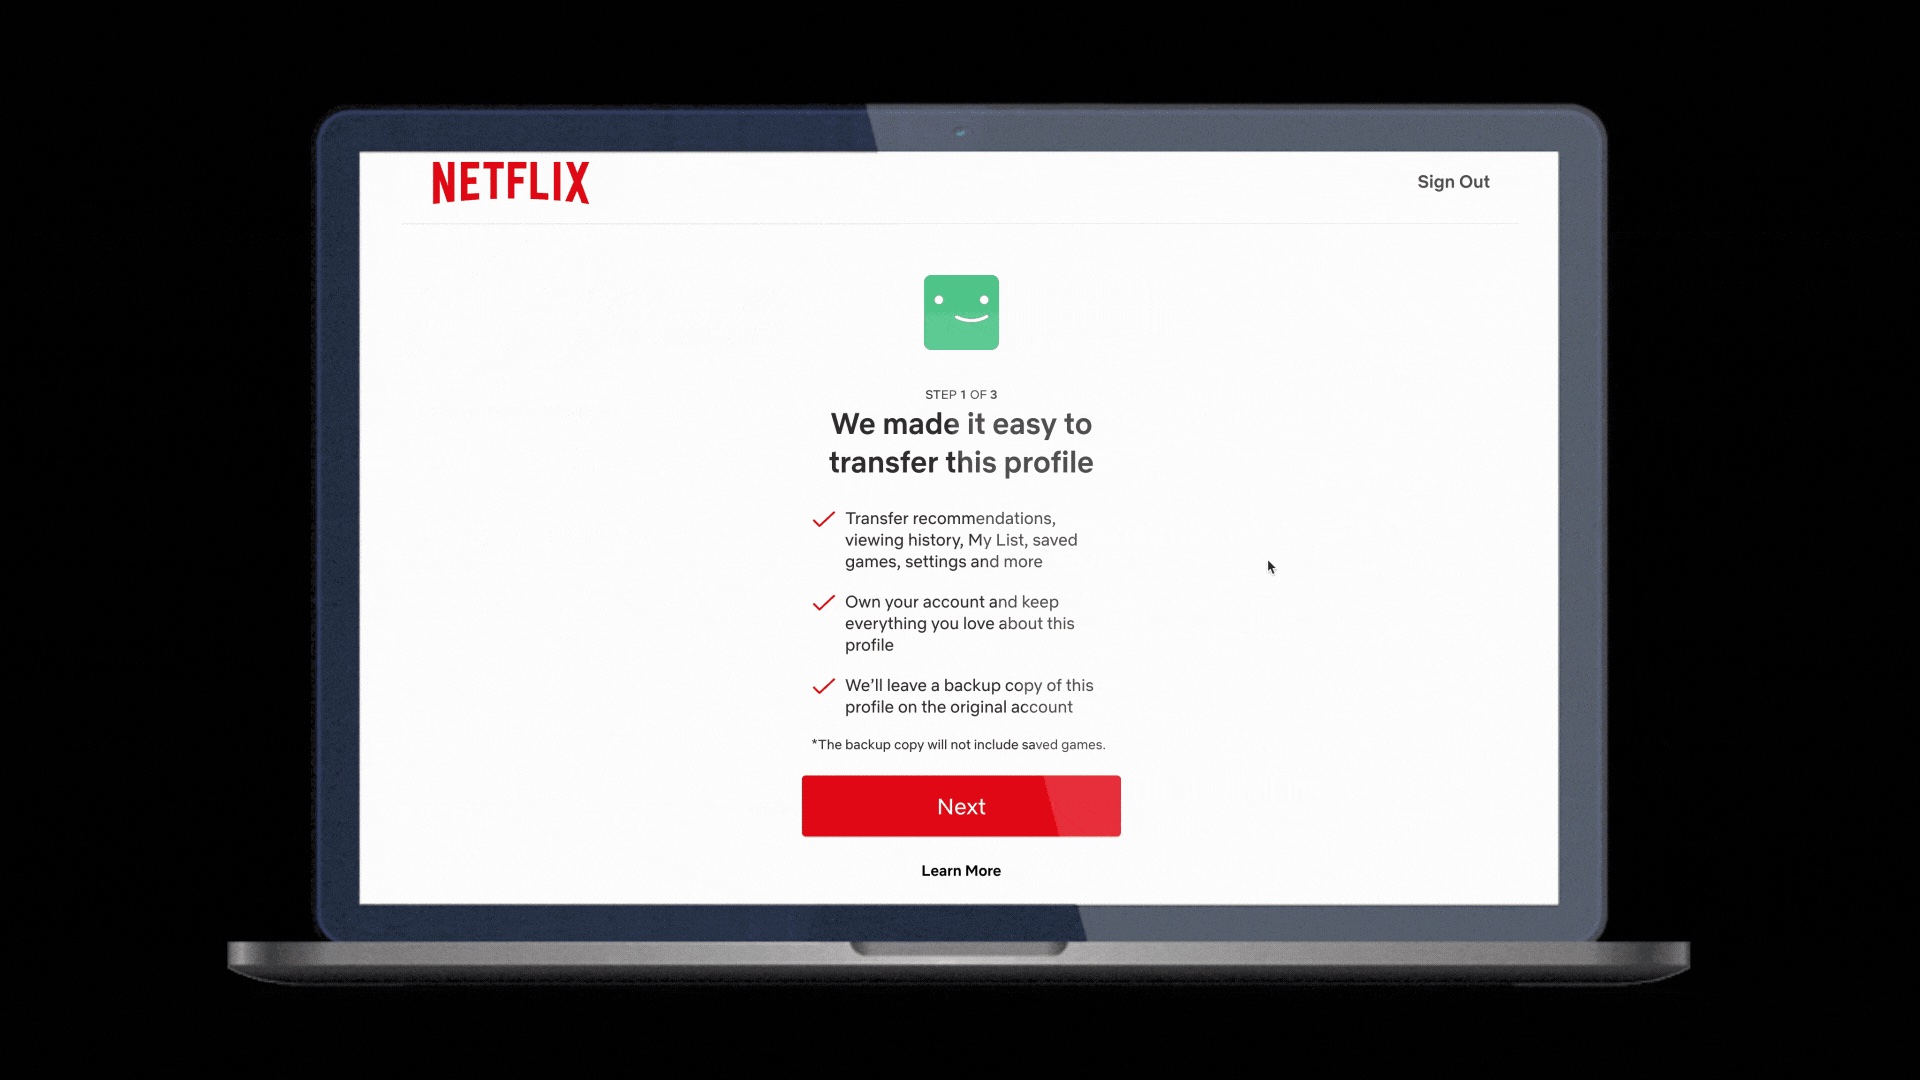 Netflix Profile Transfer Feature Hints at Upcoming Account Sharing Crackdown